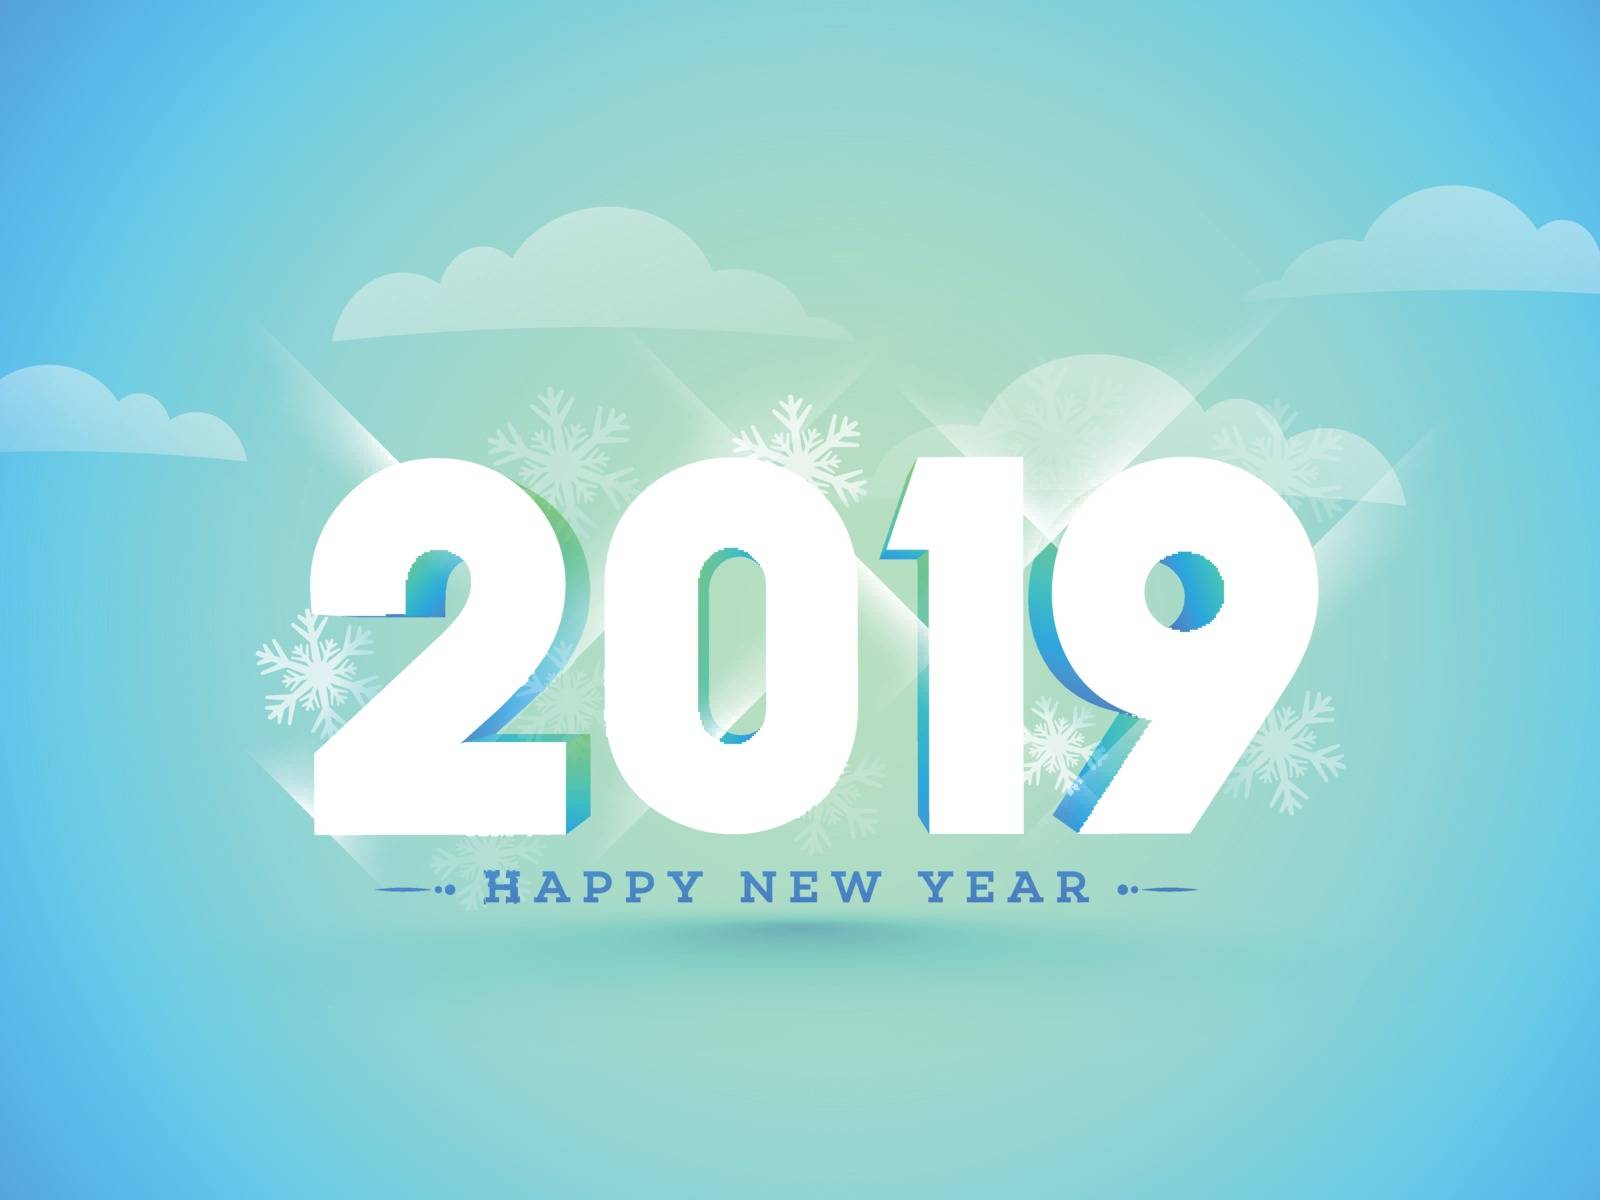 3D, white text 2019 on glossy cloudy background with snowflakes. Happy New Year greeting card design.